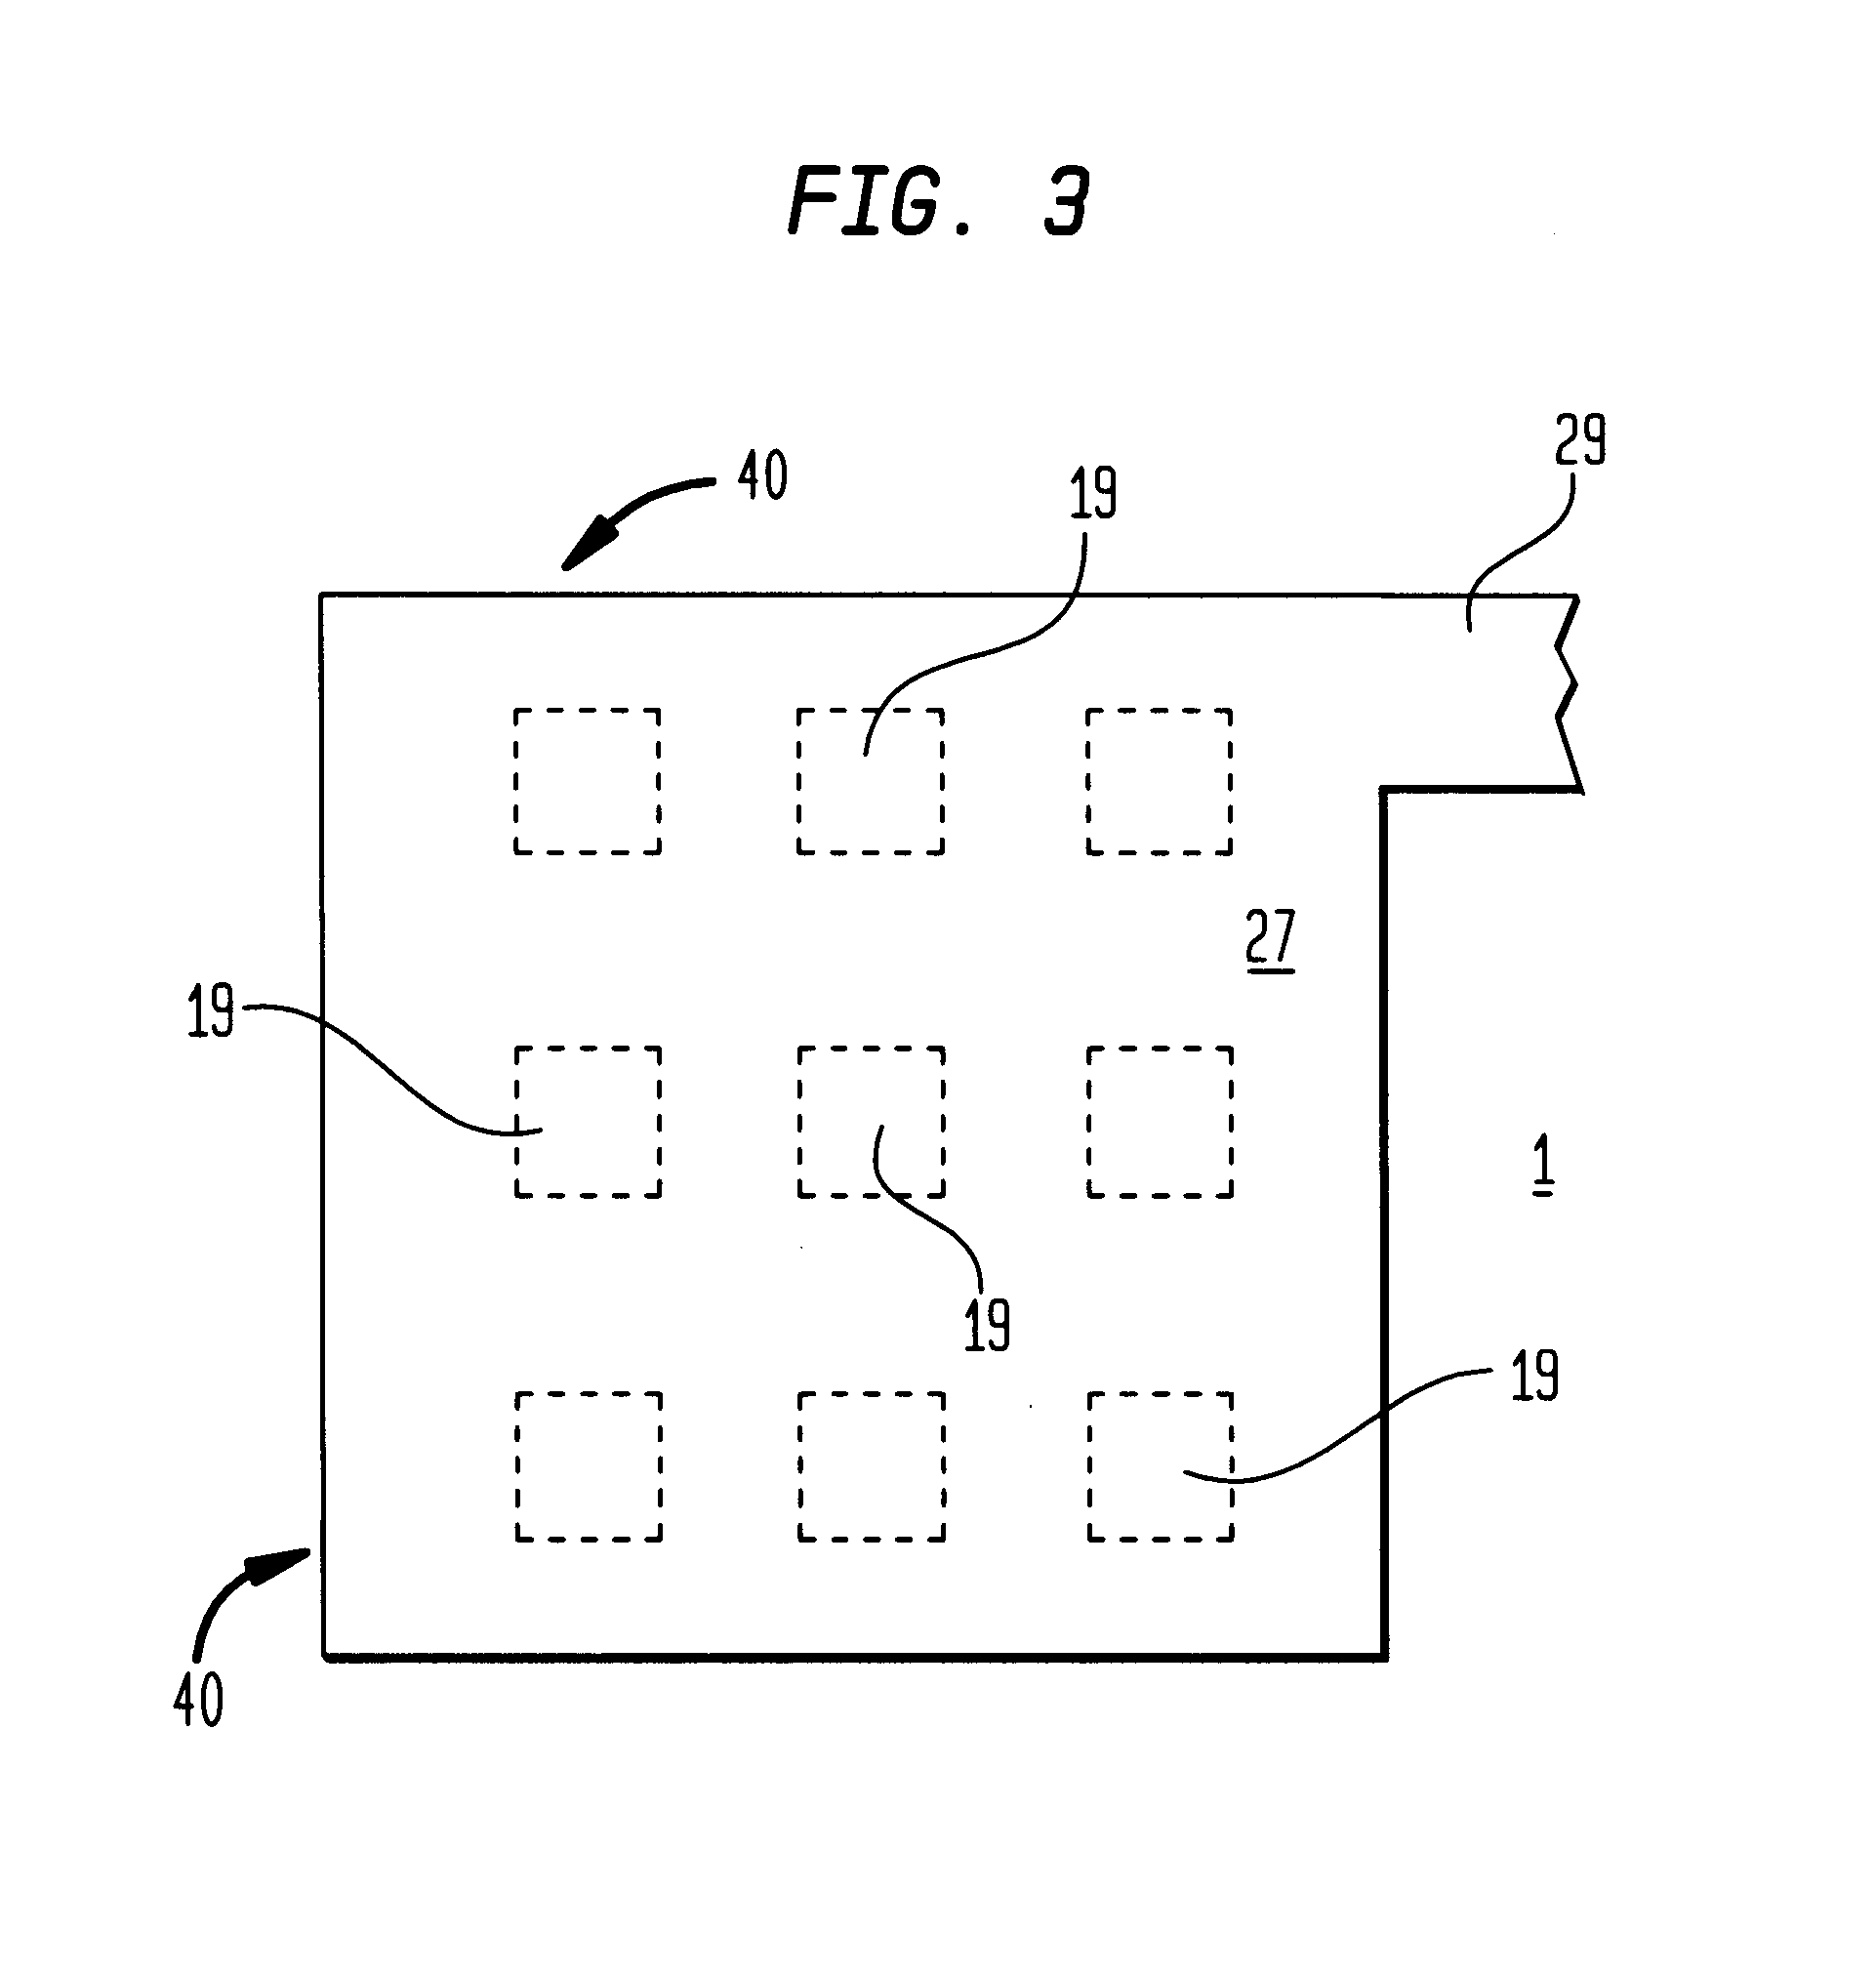 Dual damascene bond pad structure for lowering stress and allowing circuitry under pads